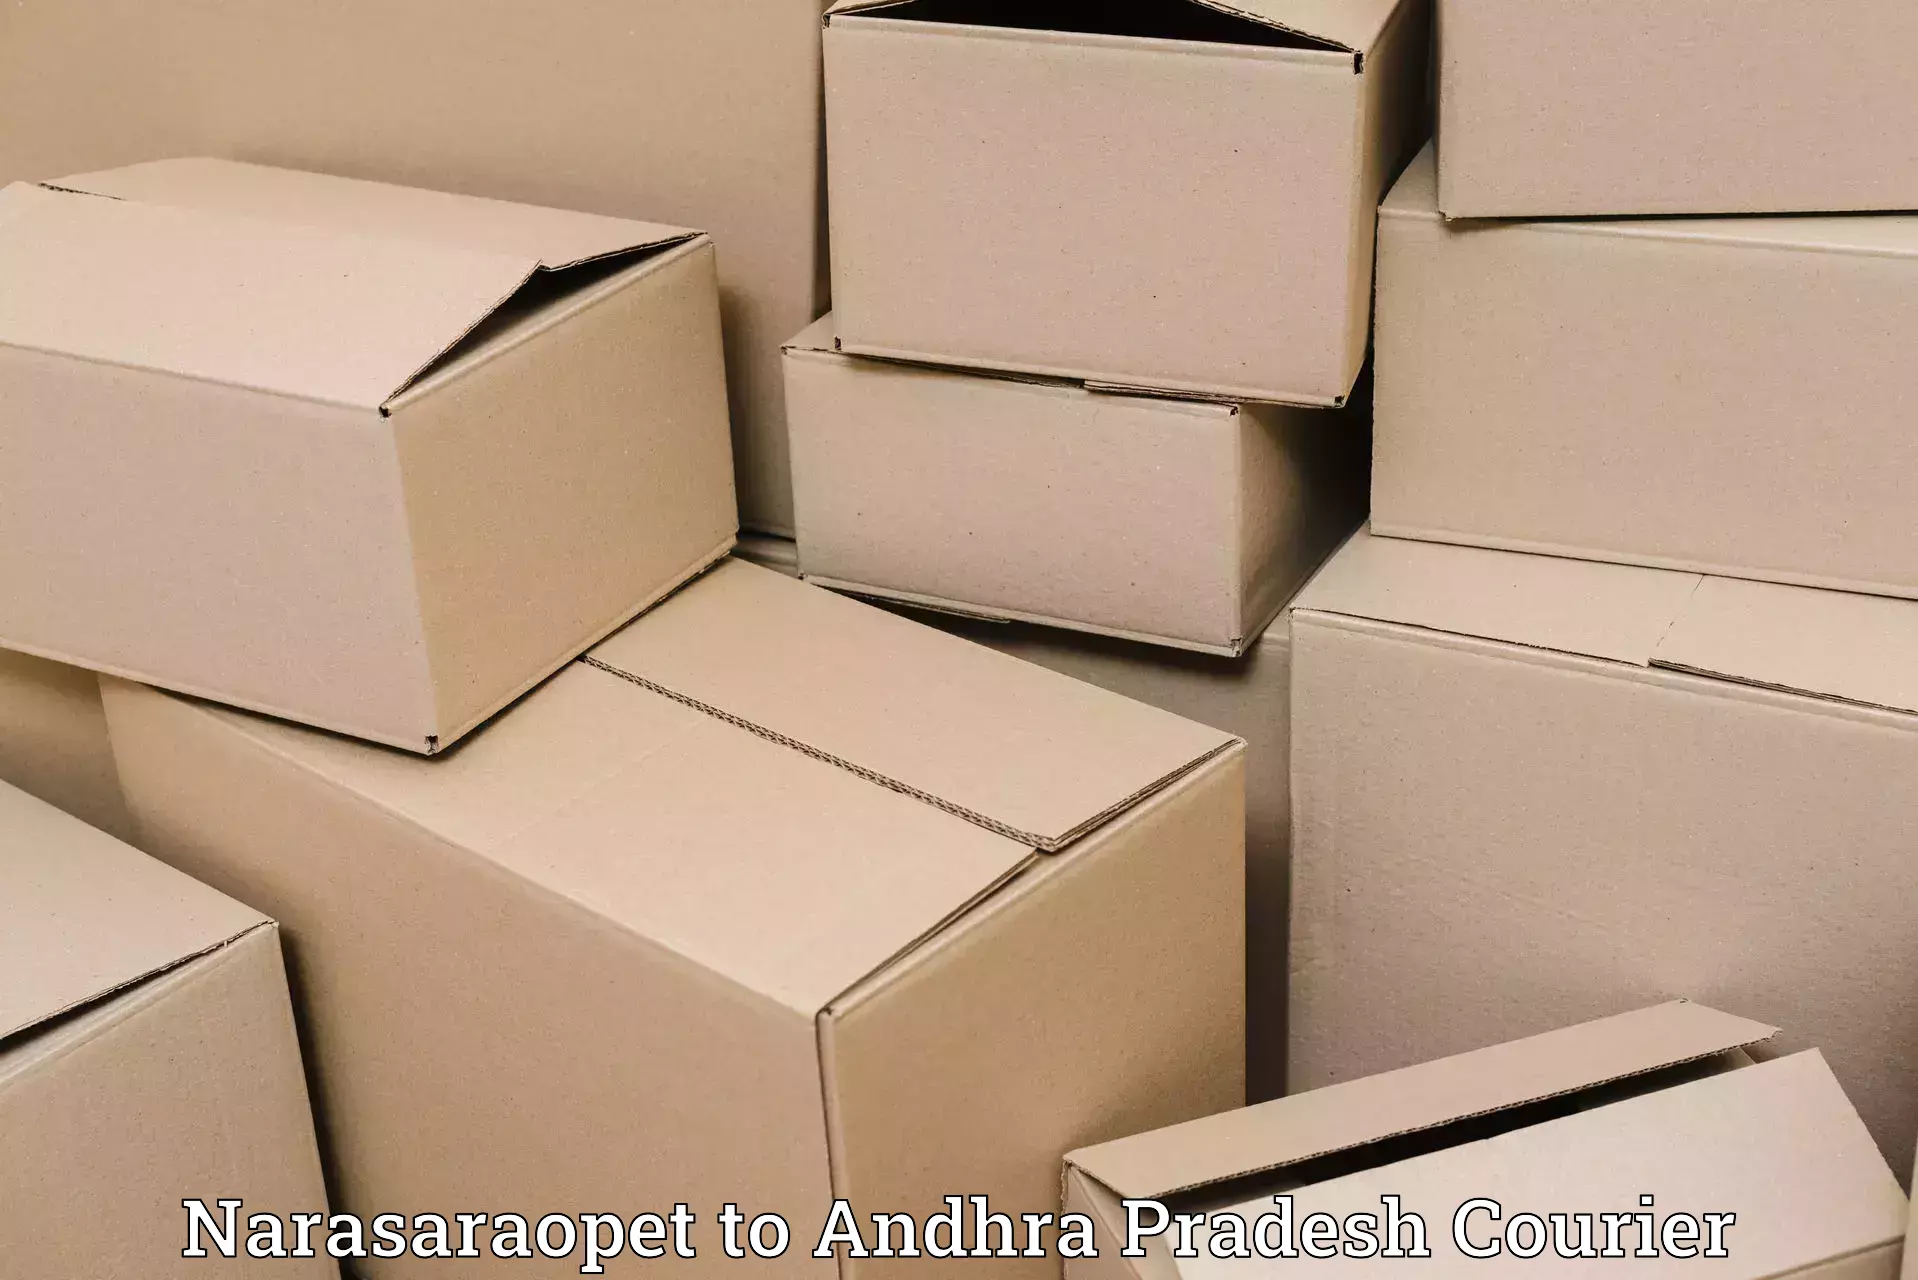 Next-day delivery options Narasaraopet to Visakhapatnam